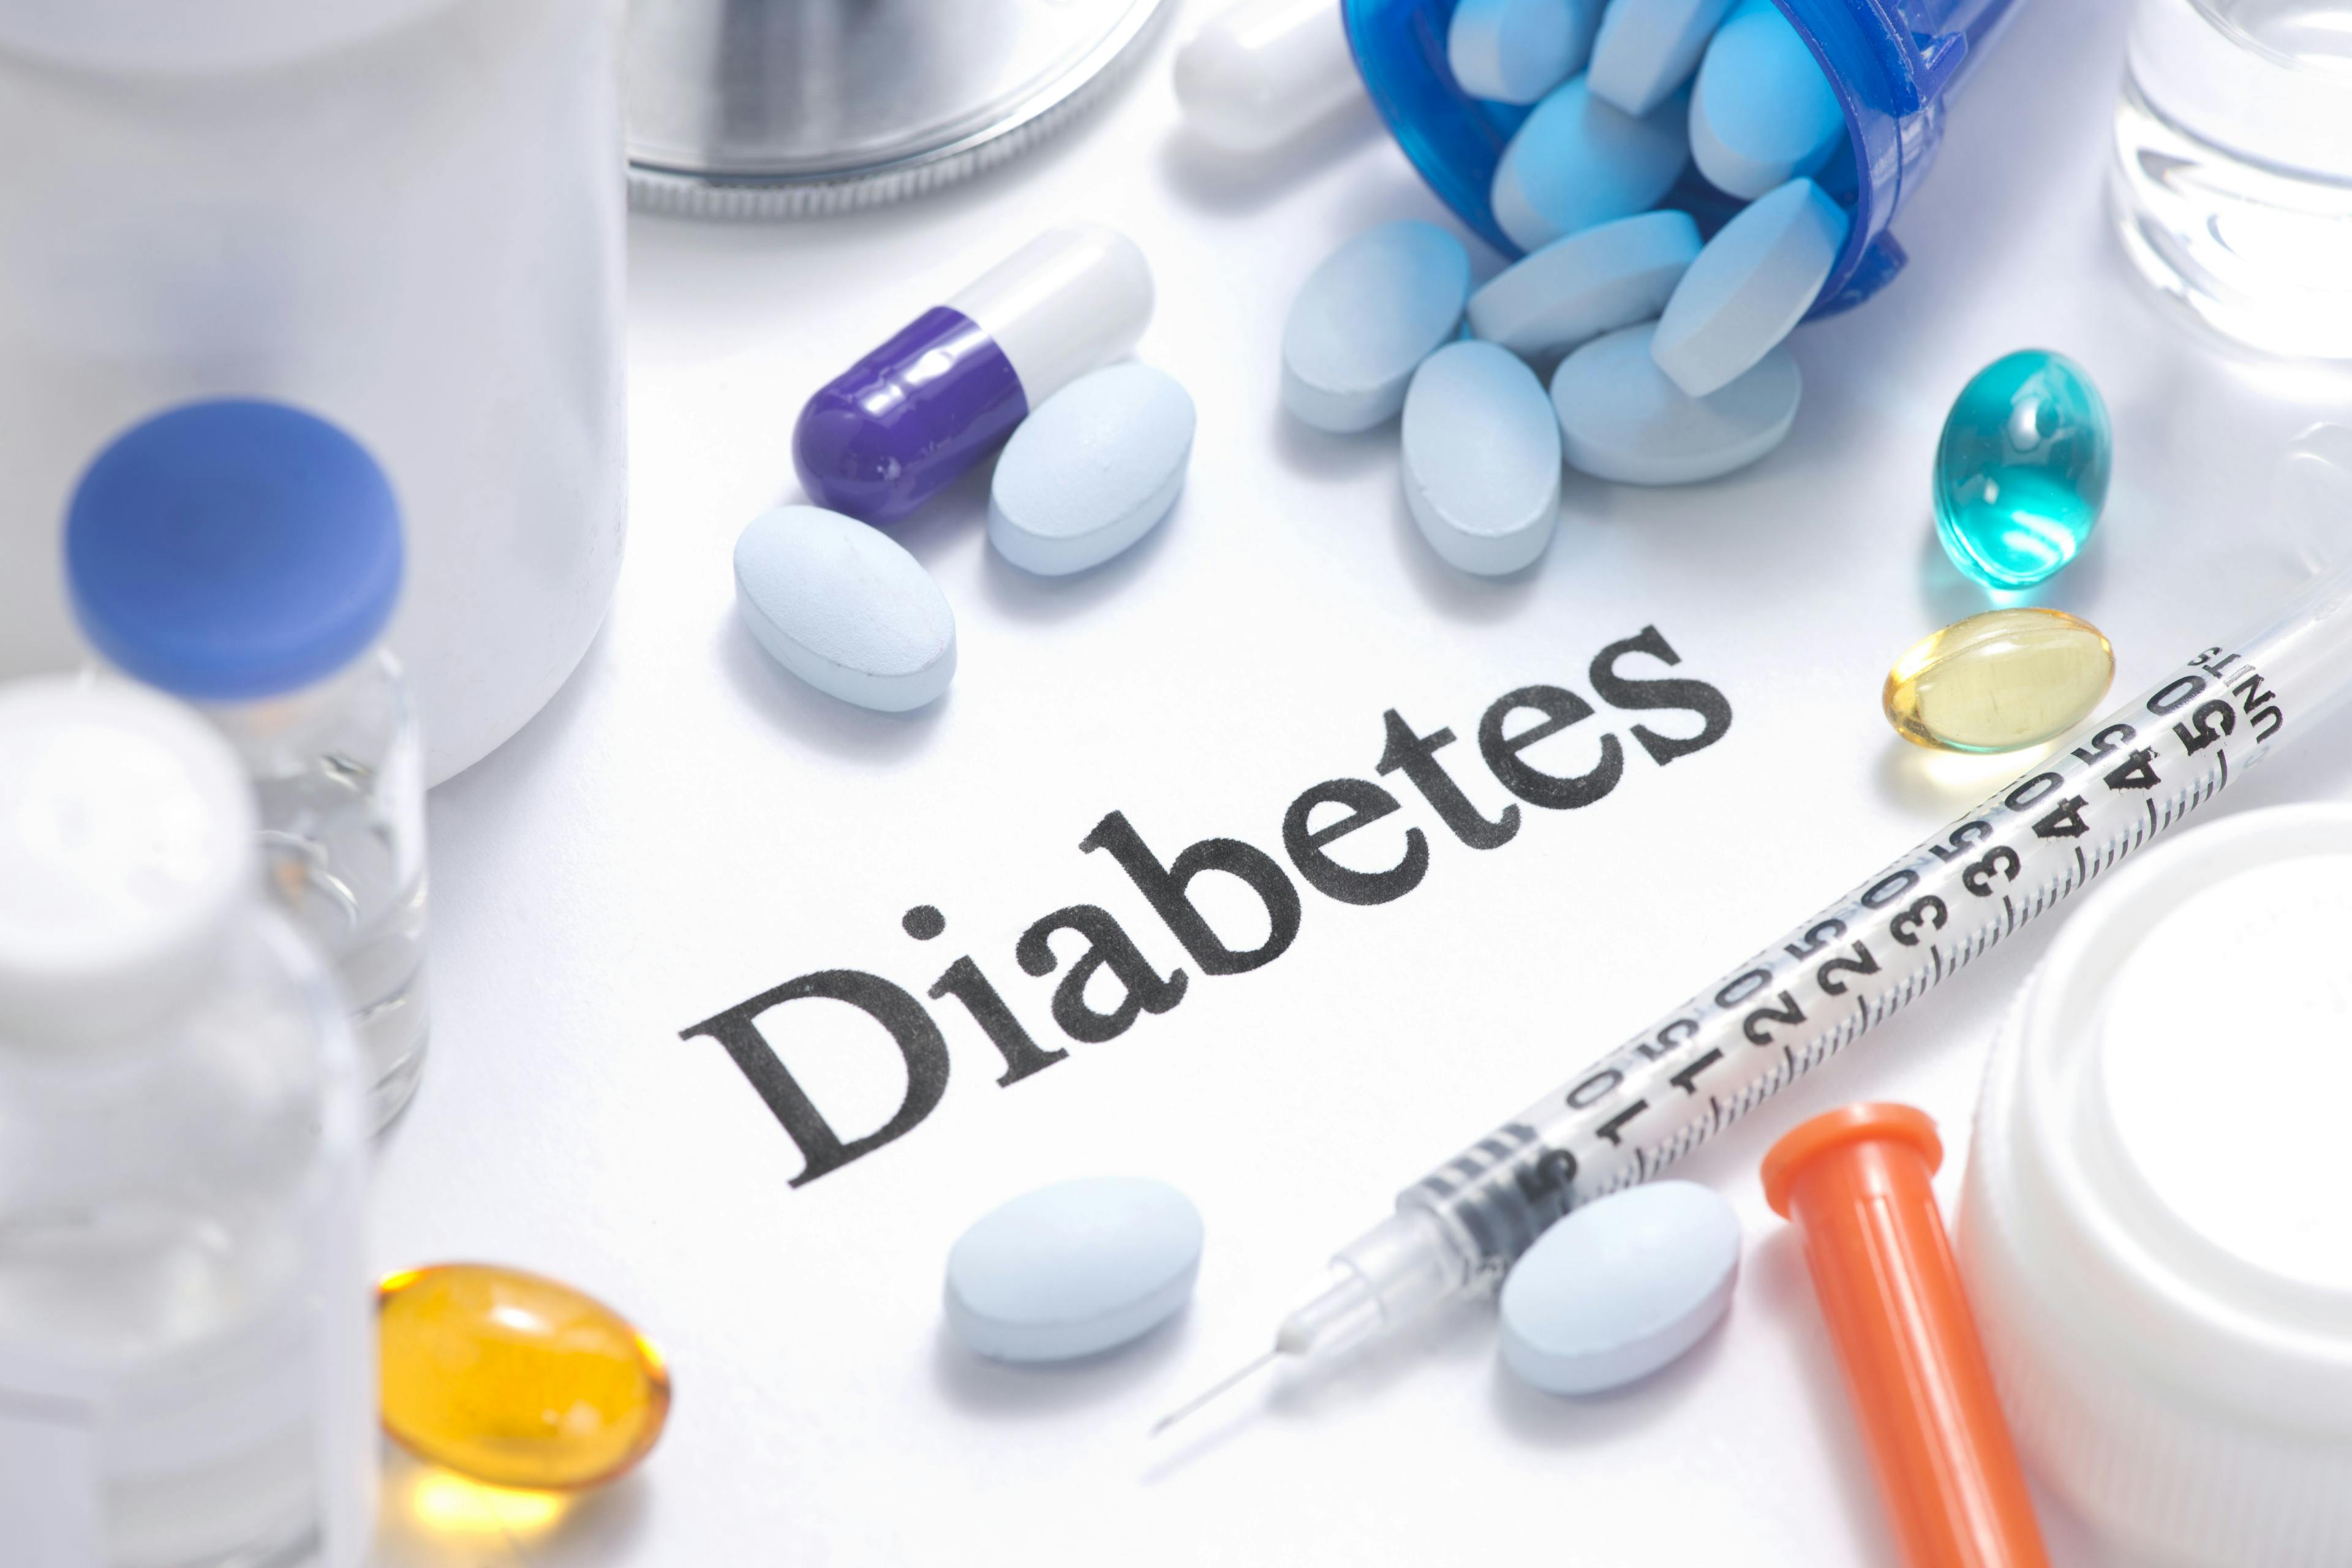 Young adults with prediabetes more likely to be hospitalized for heart attacks